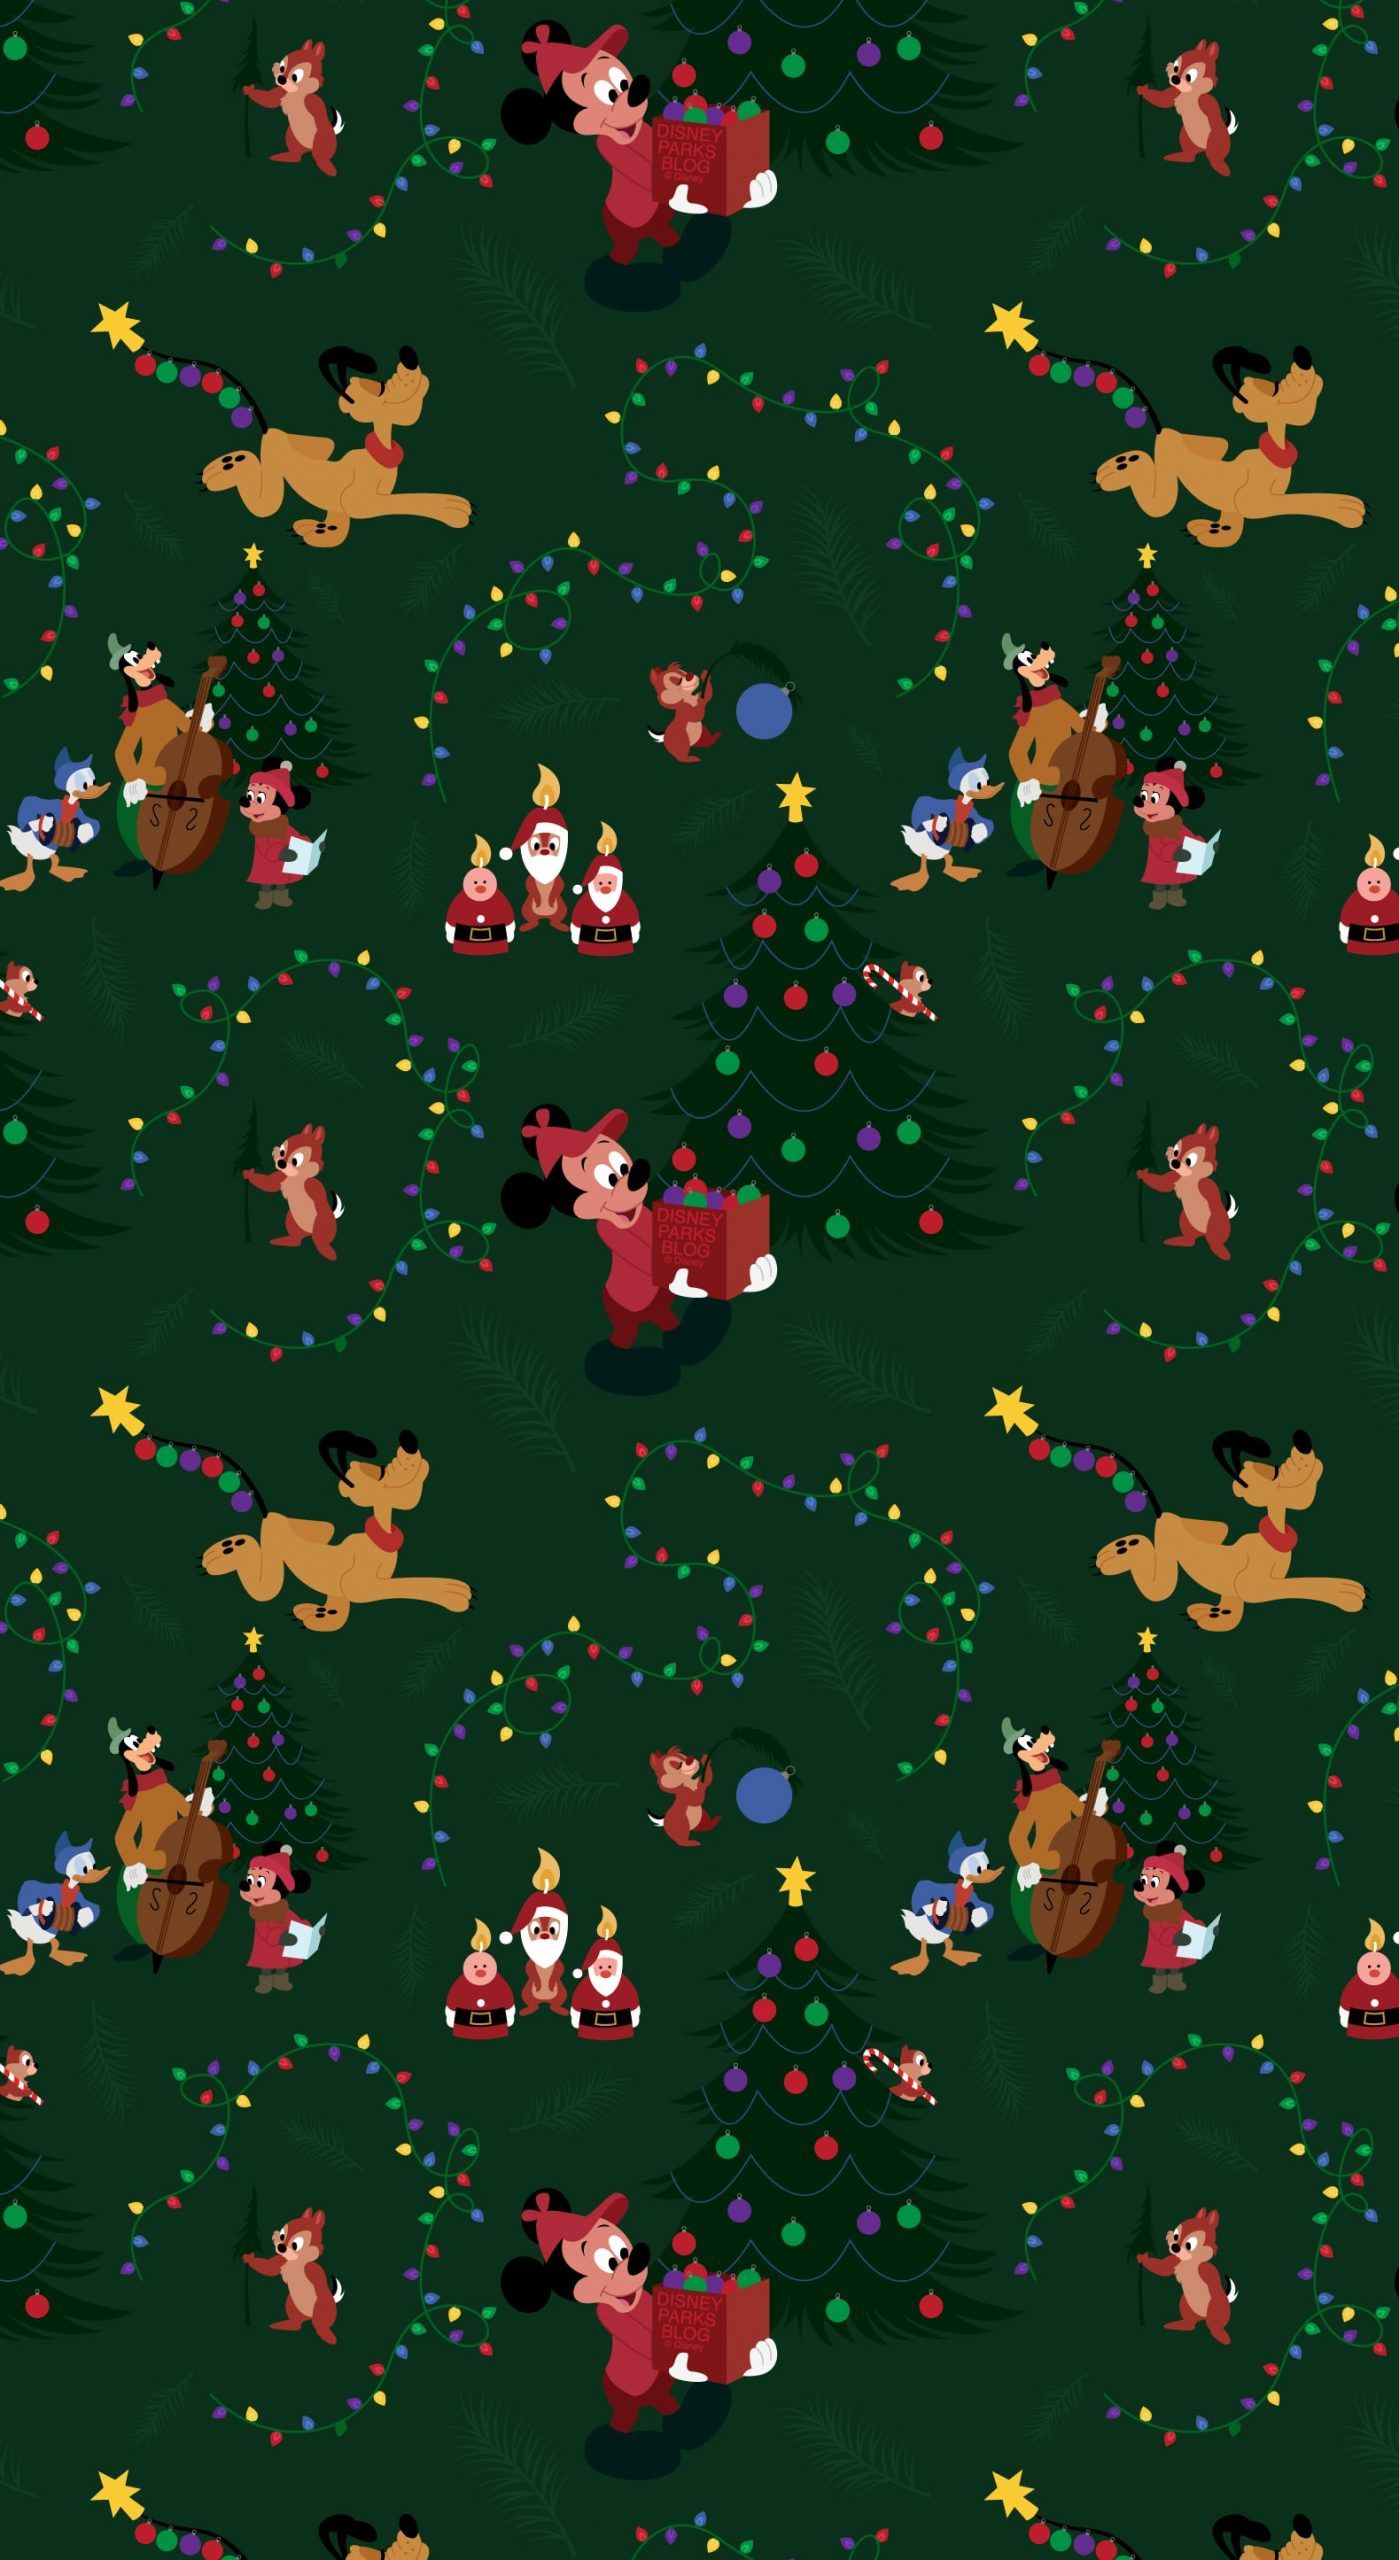 A green background with a pattern of Pluto, Goofy, and other Disney characters around a Christmas tree and presents. The characters are in various poses and the tree is decorated with stars and balls of different sizes. The background is dark green with white and yellow stars scattered throughout. The characters are in shades of brown, beige, and white. - Christmas iPhone, Disney, cute Christmas